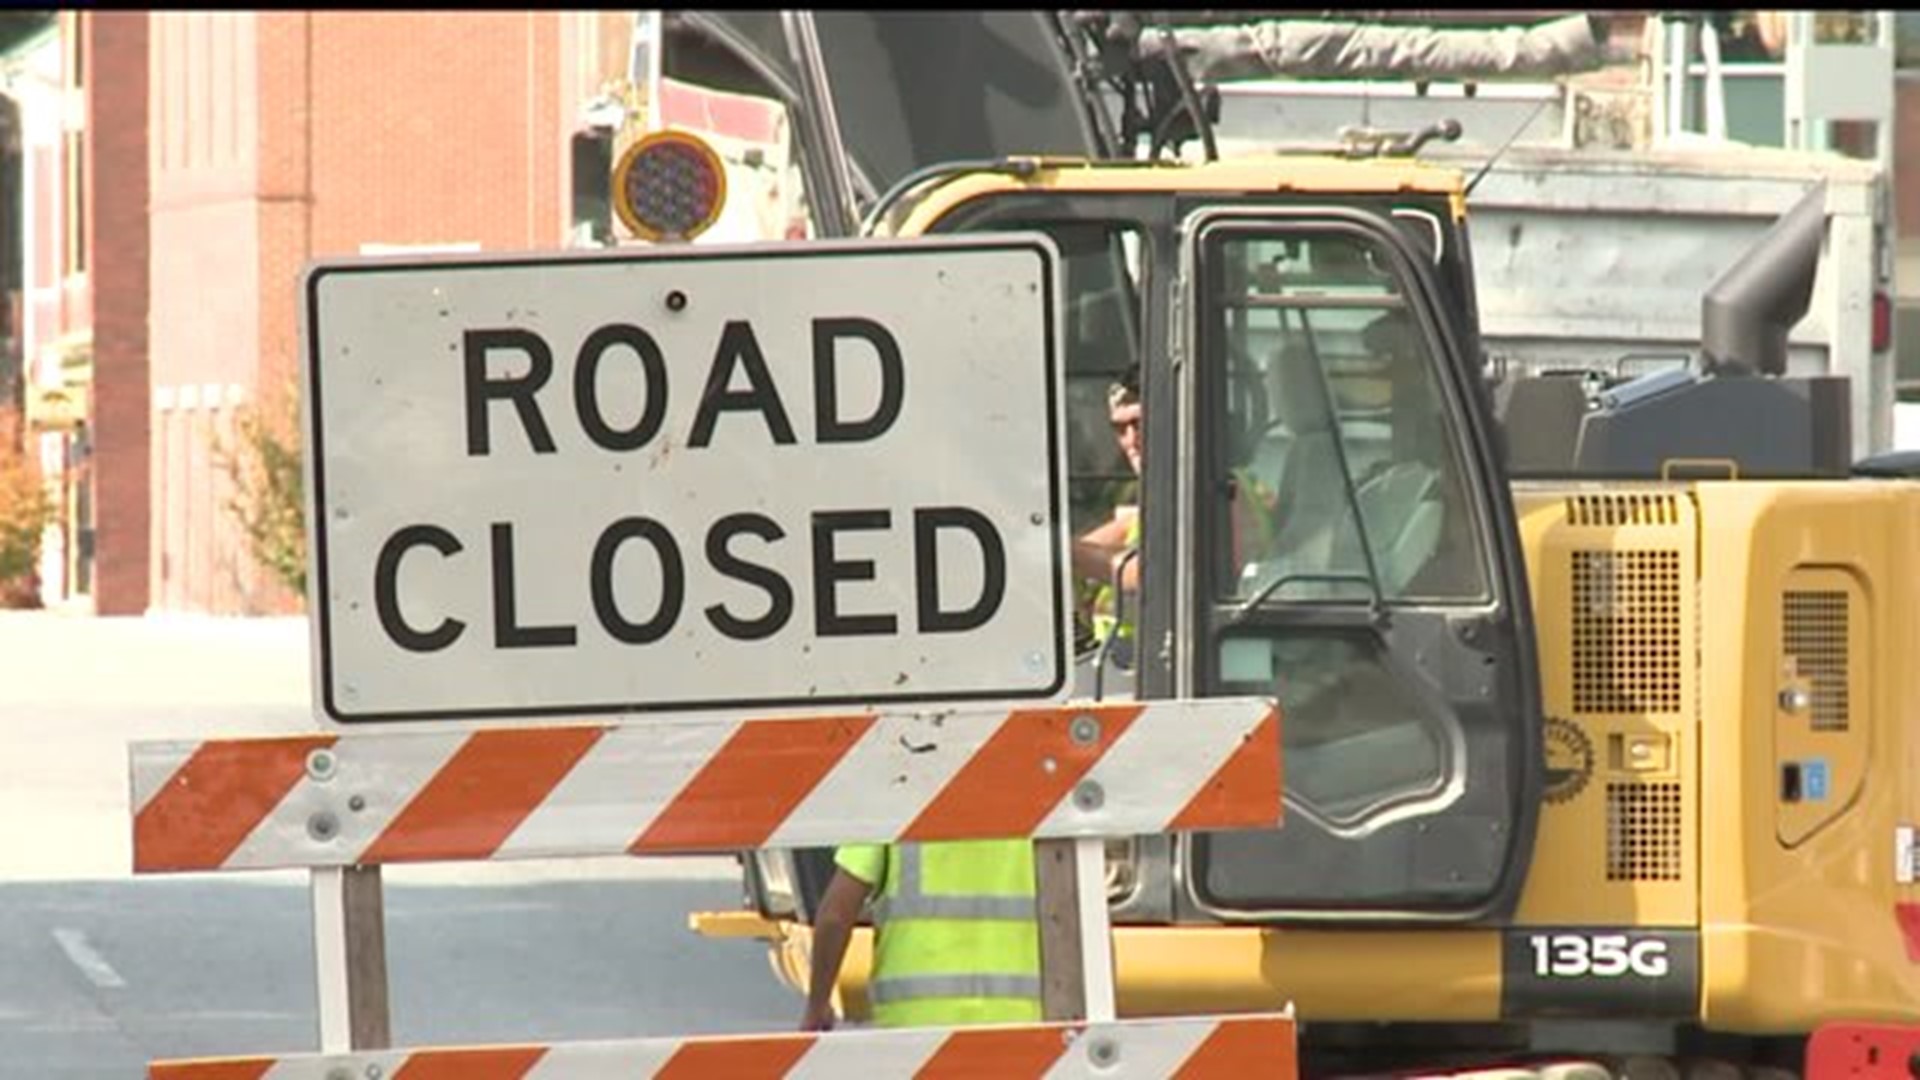 York roadwork causes issues for local business